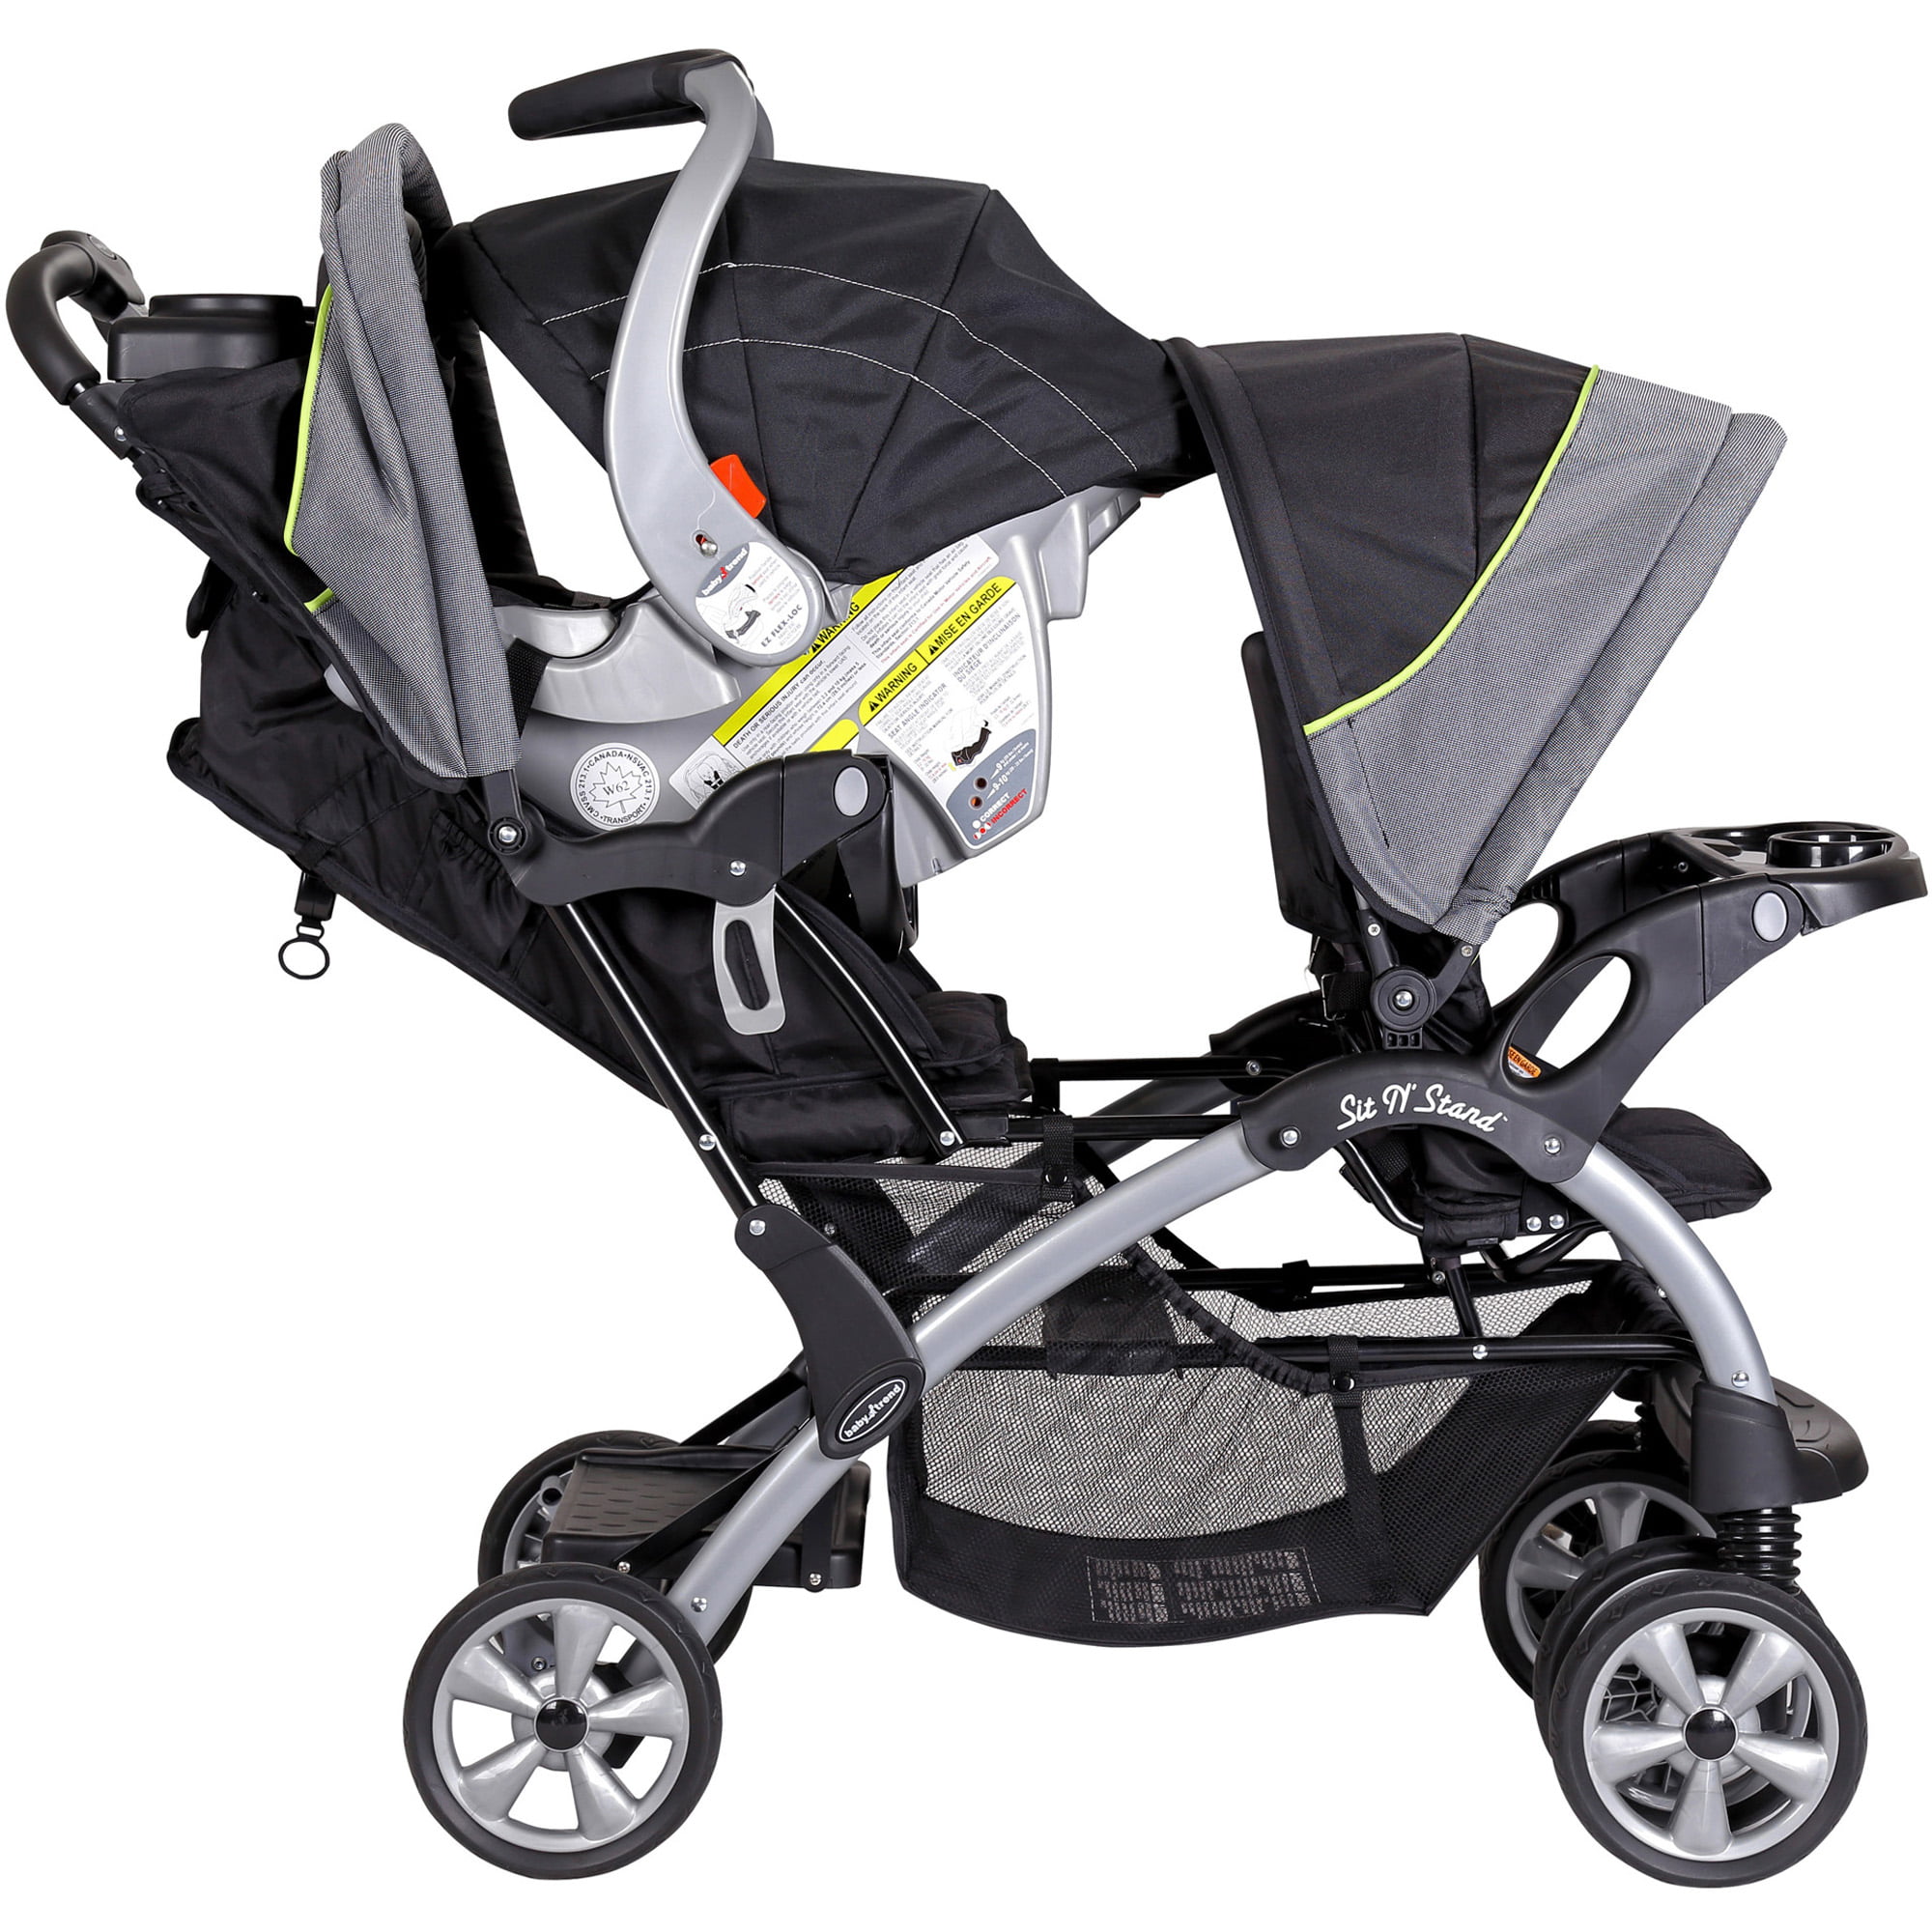 Strollers With Car Seats At Walmart - Stroller